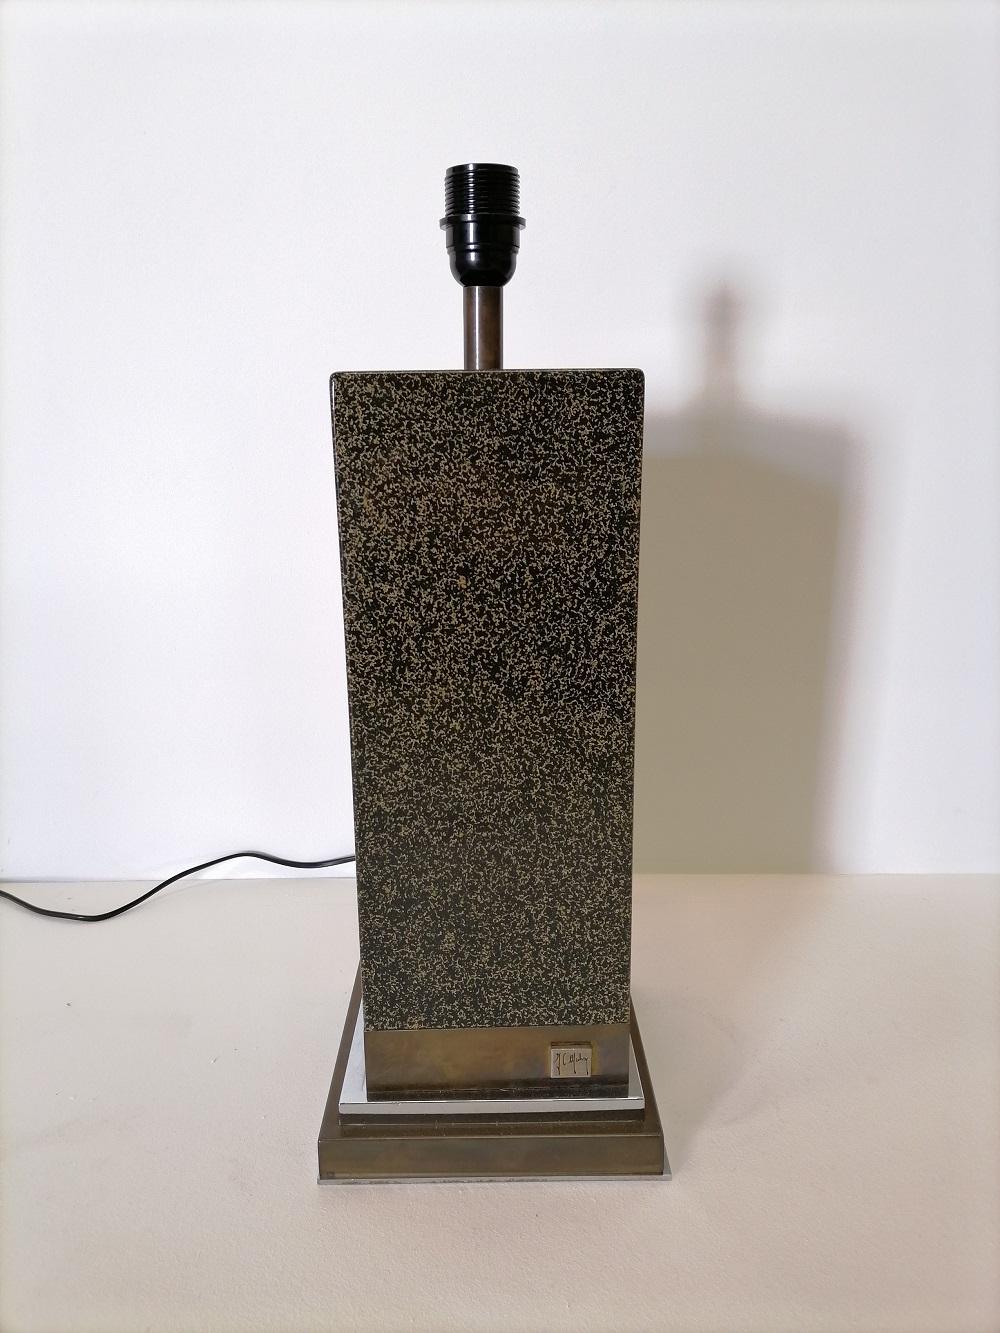 Jean Claude Mahey lacquer and brass table lamp, 1970, France

A big table lamp with black lacquer and golden glitters by the French designer
Jean-Claude Mahey

Original label with signature on the base 

Good condition

Shade not included.